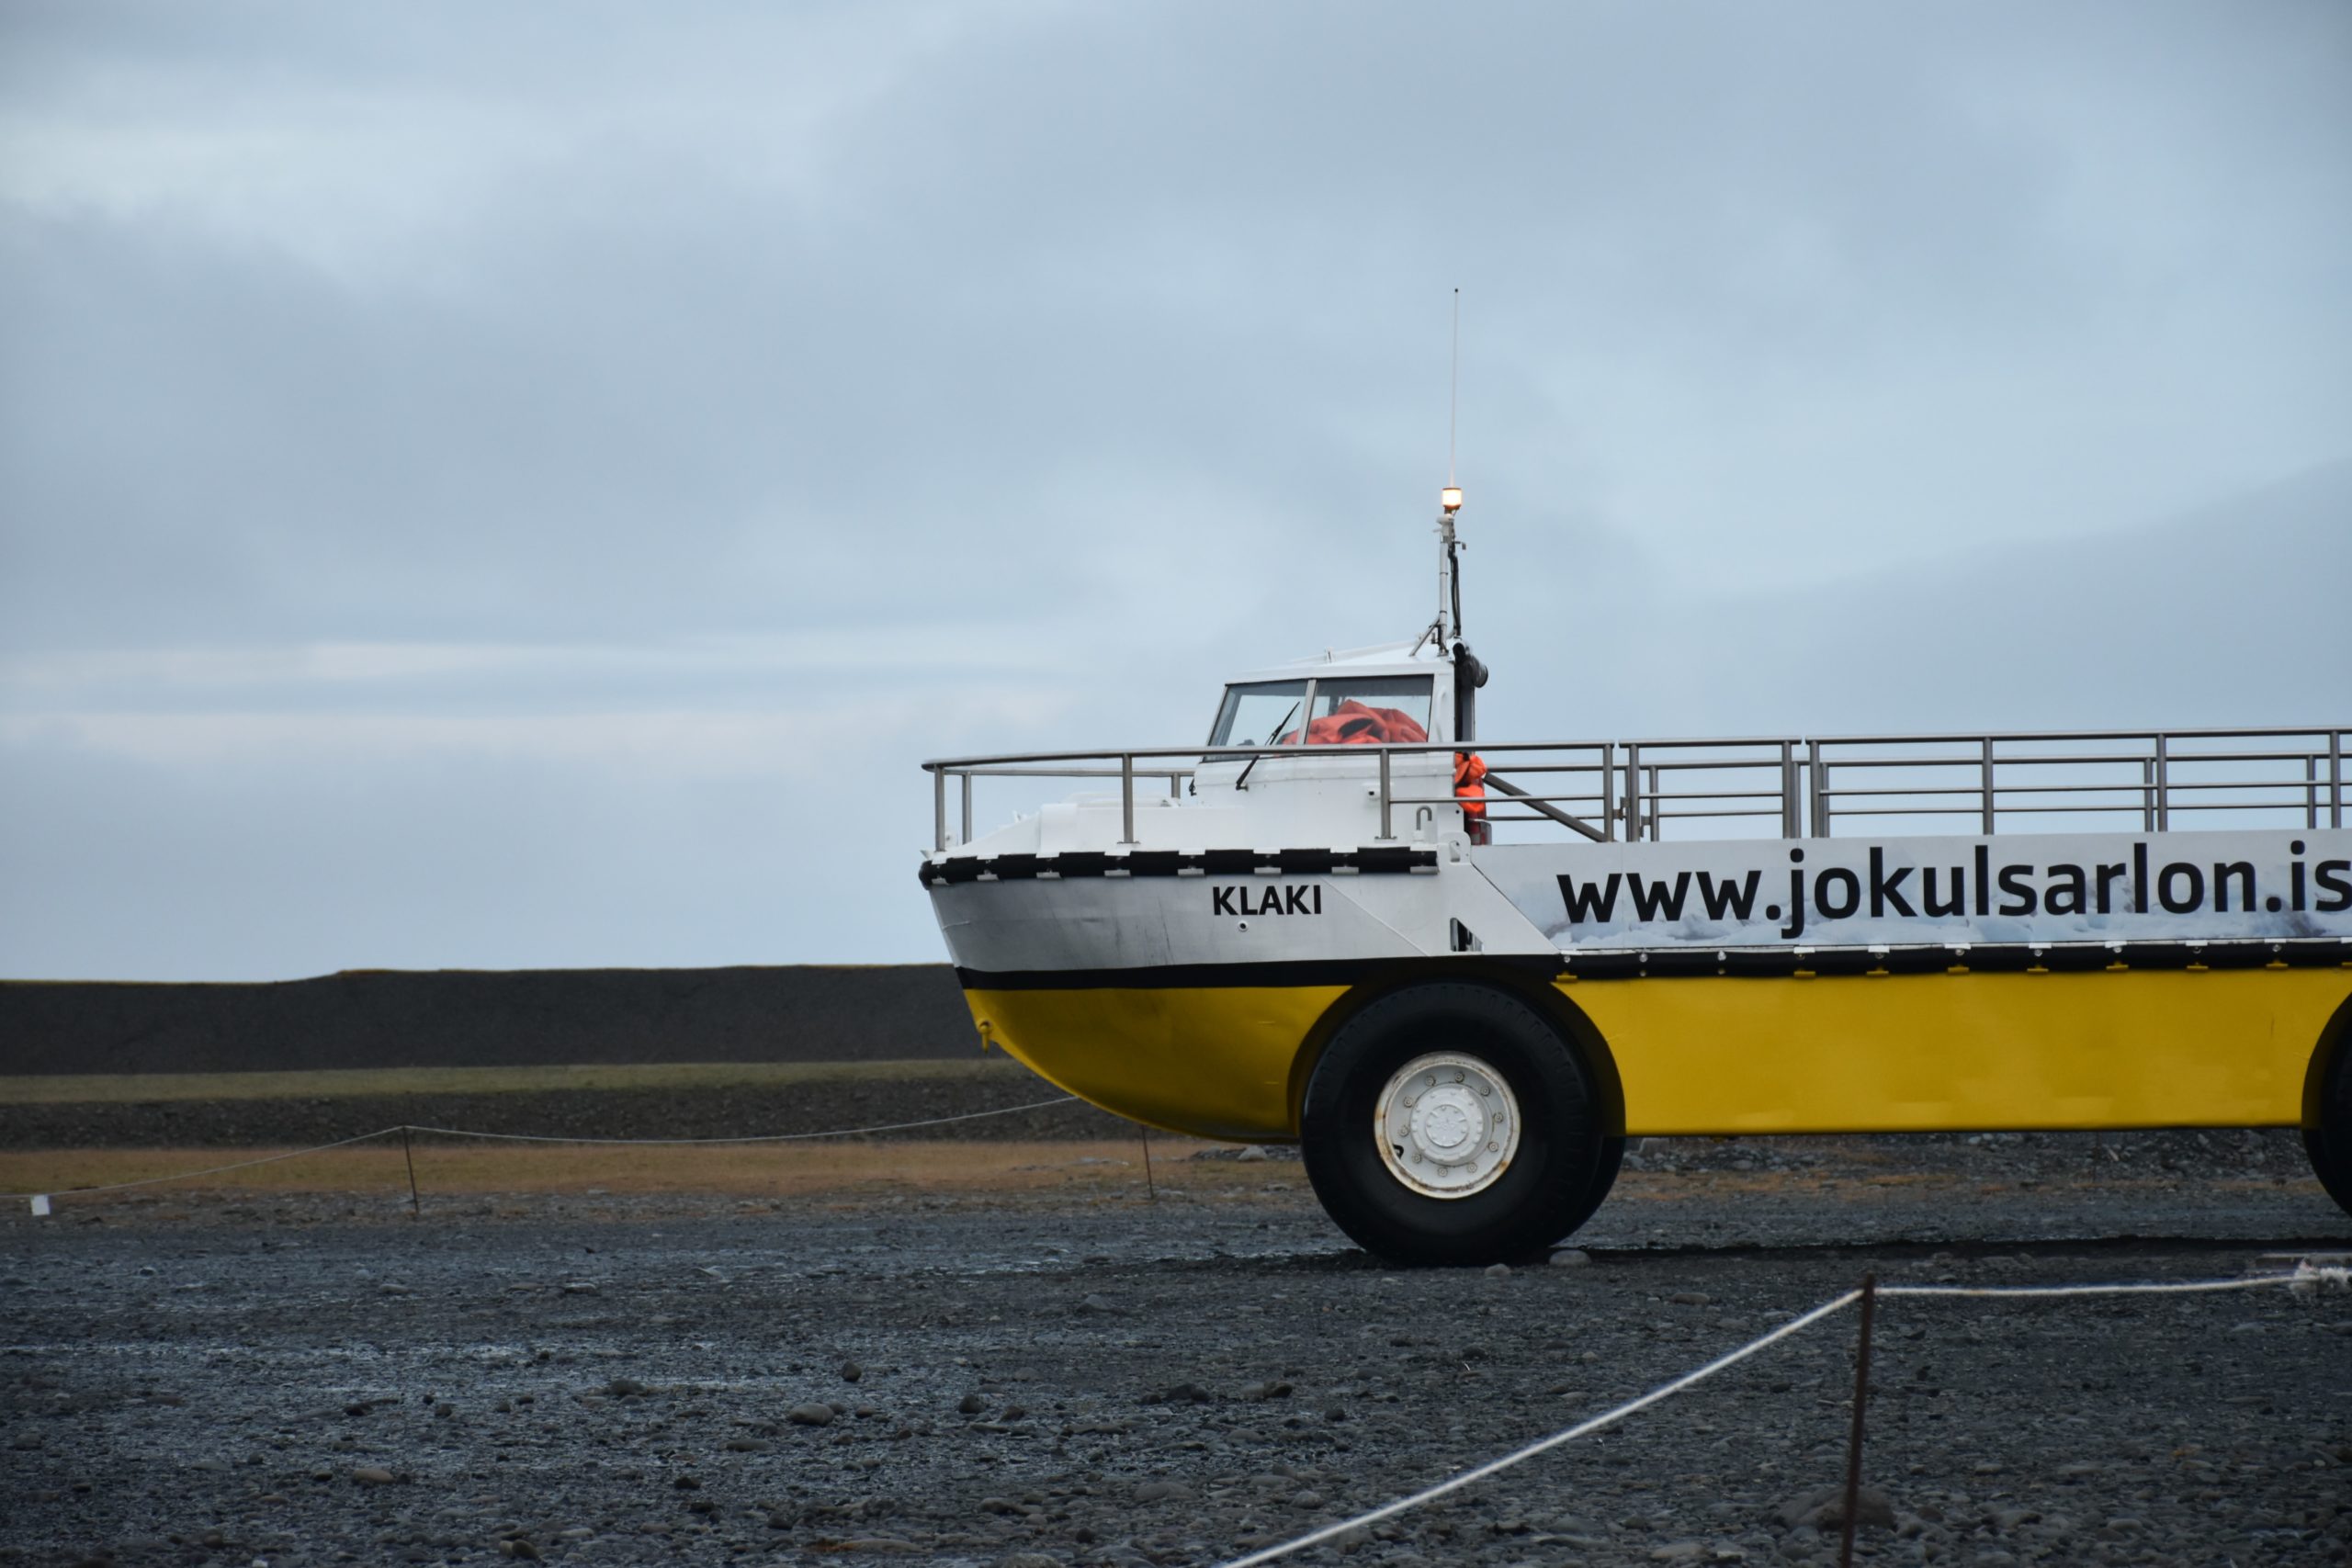 An amphibious vehicle in Iceland